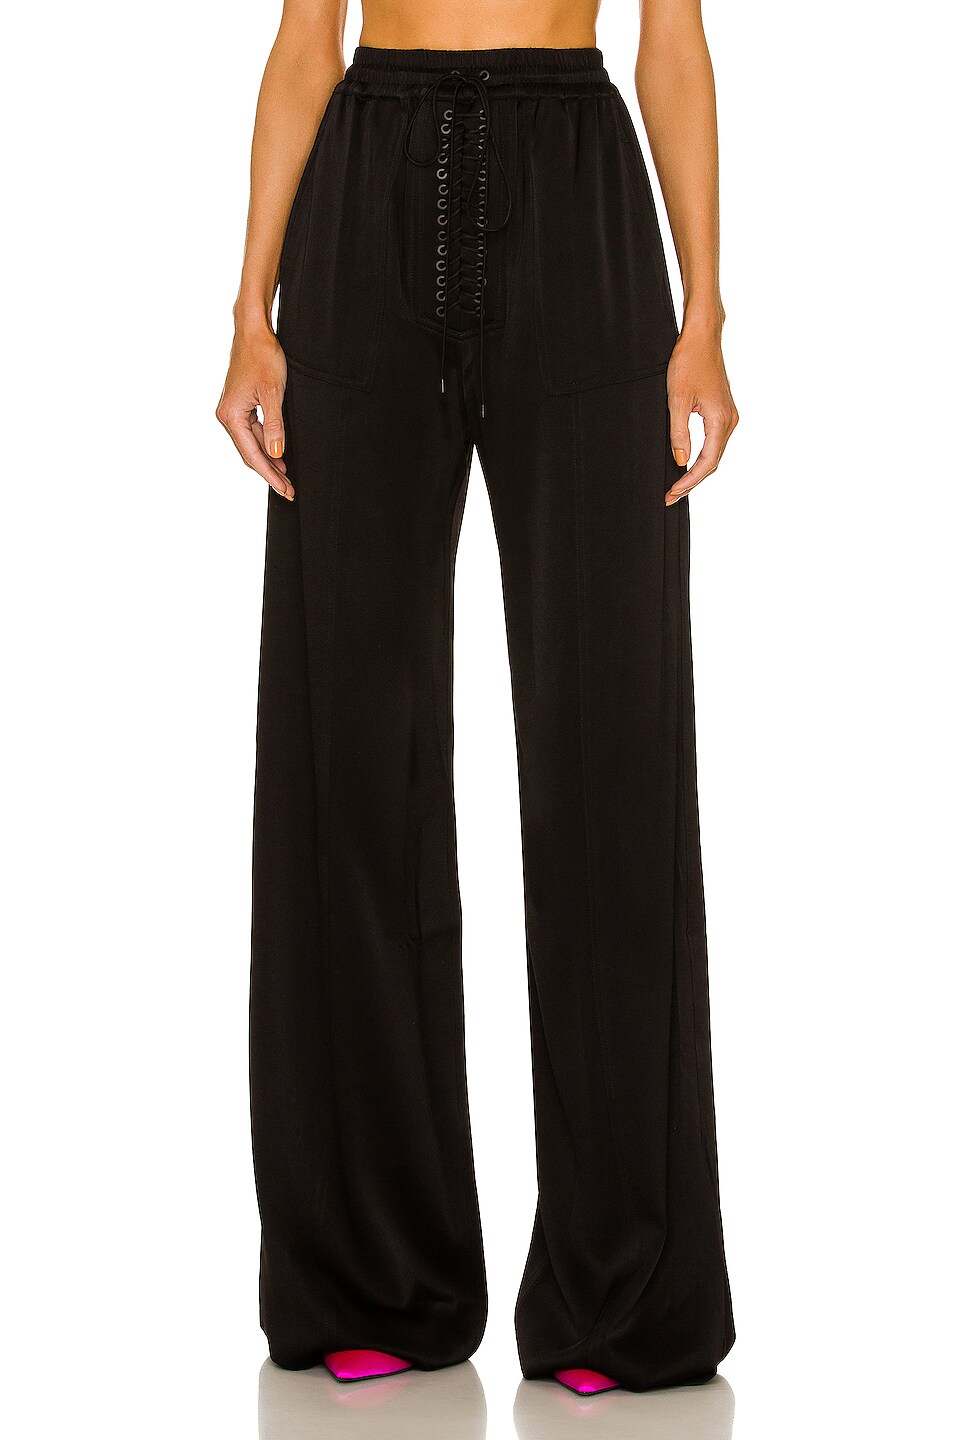 Image 1 of Alex Perry Harland Eyelet Wide Leg Pants in Black